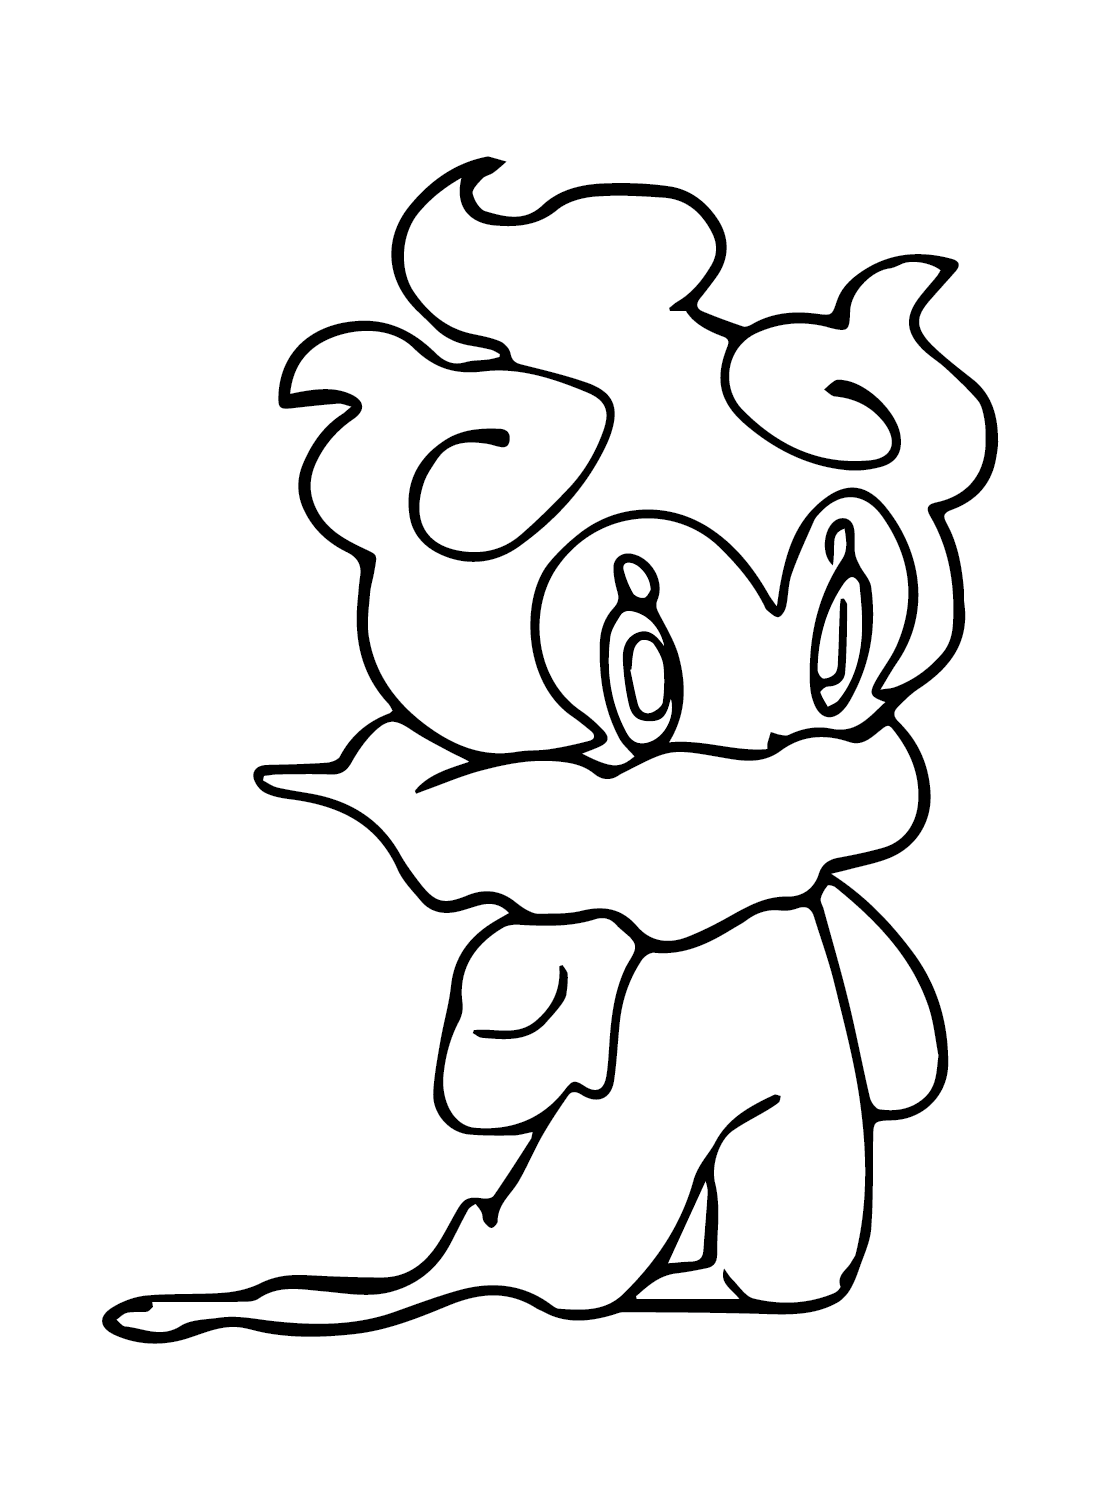 Marshadow from the Pokemon Coloring Page